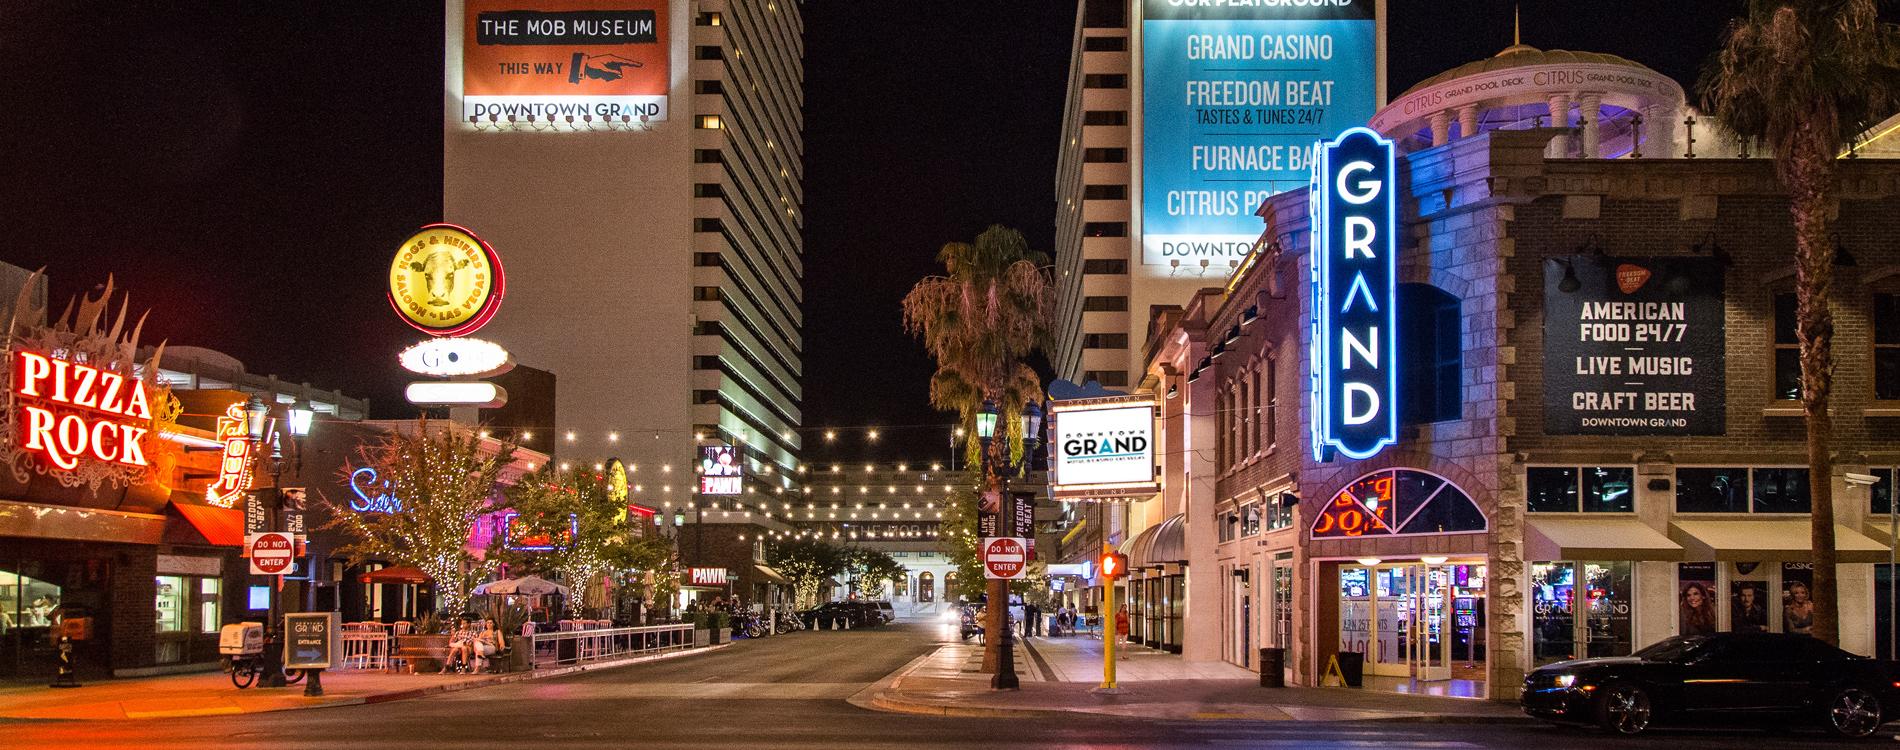 New downtown Las Vegas sign set to light up entry into city, Downtown, Local